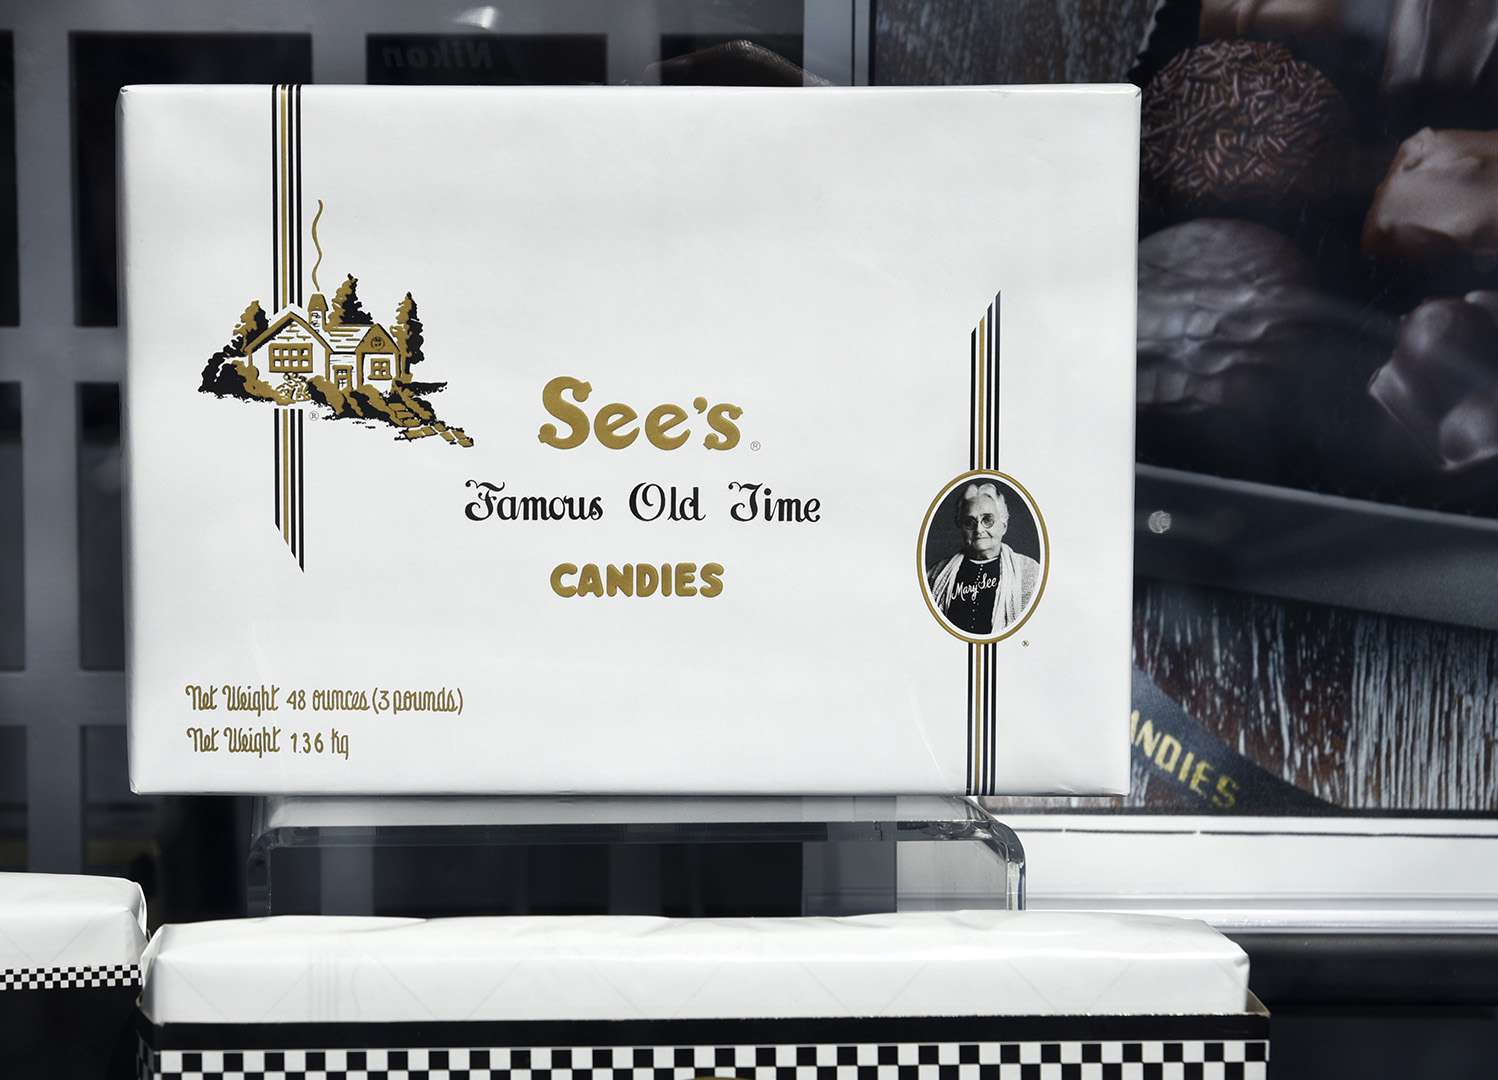 a box of See's Candies sits on display